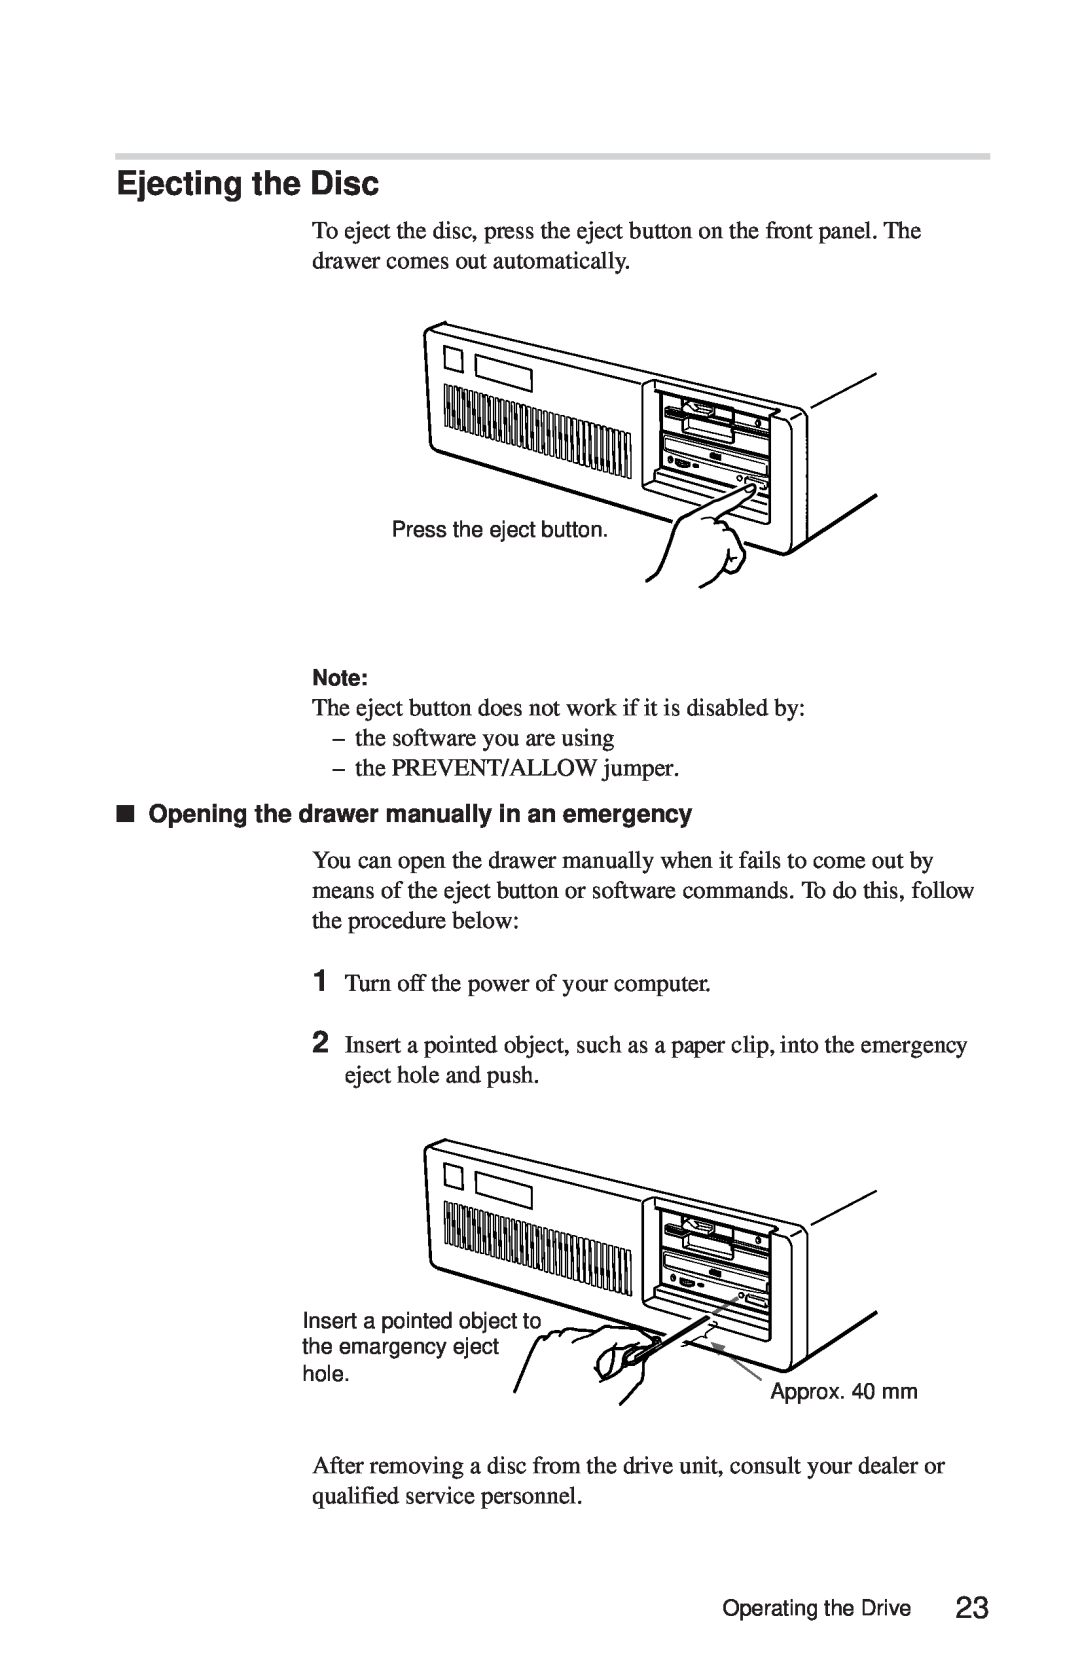 Sony CDU625 Ejecting the Disc, Opening the drawer manually in an emergency 